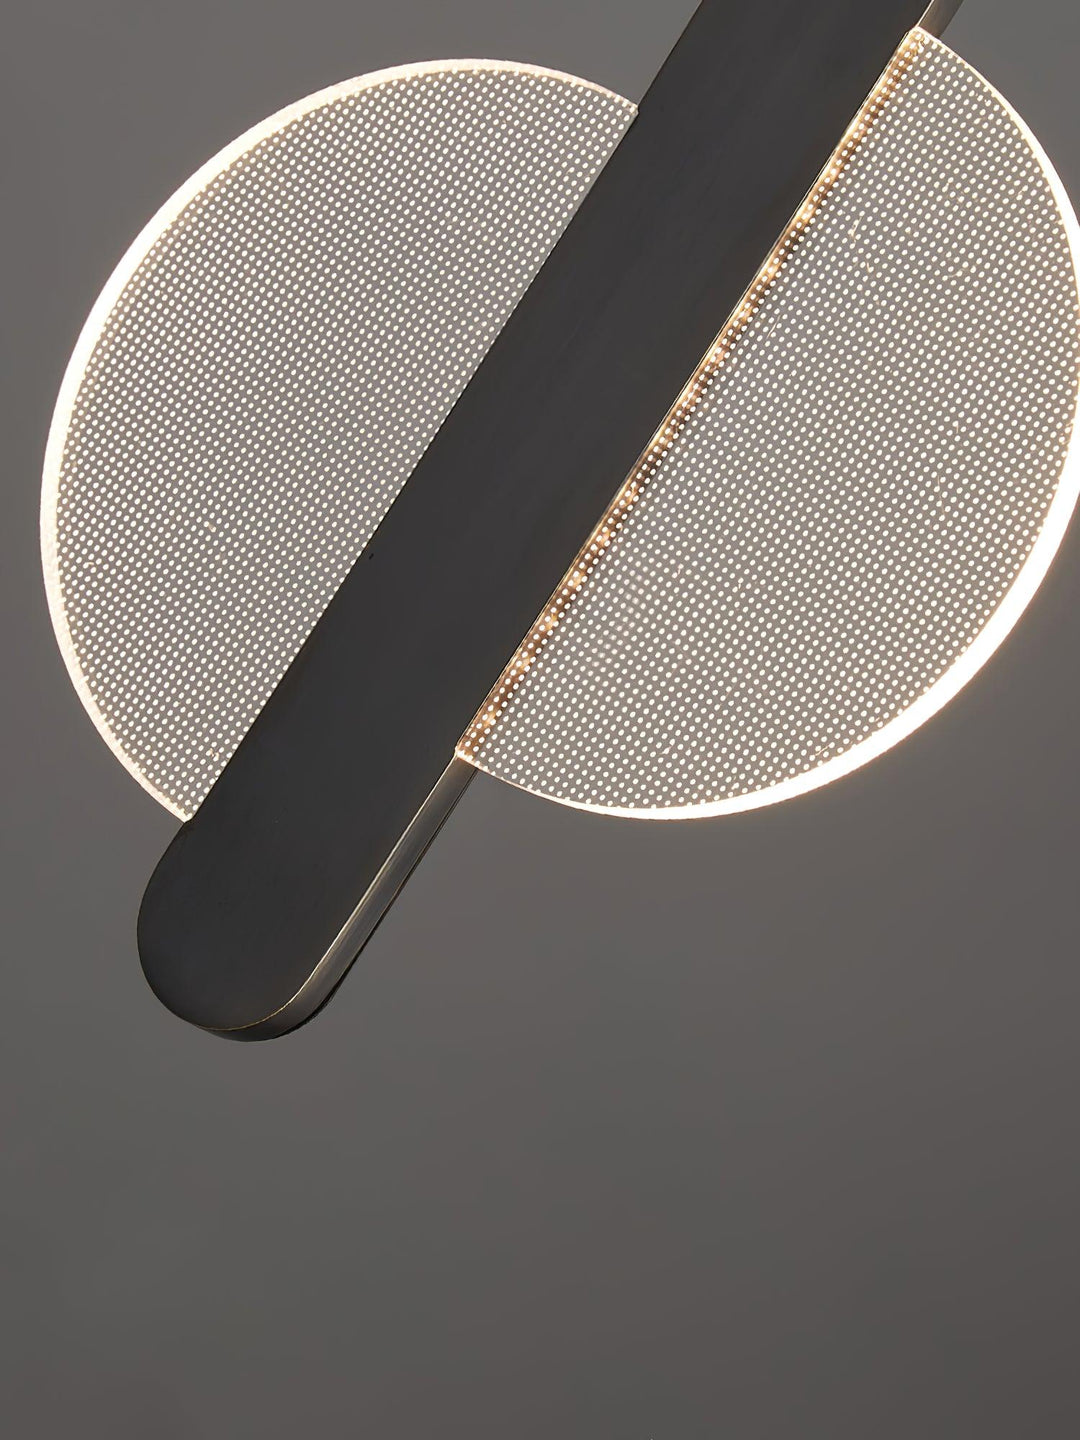 The Details of Bedside Acrylic Pendant Light